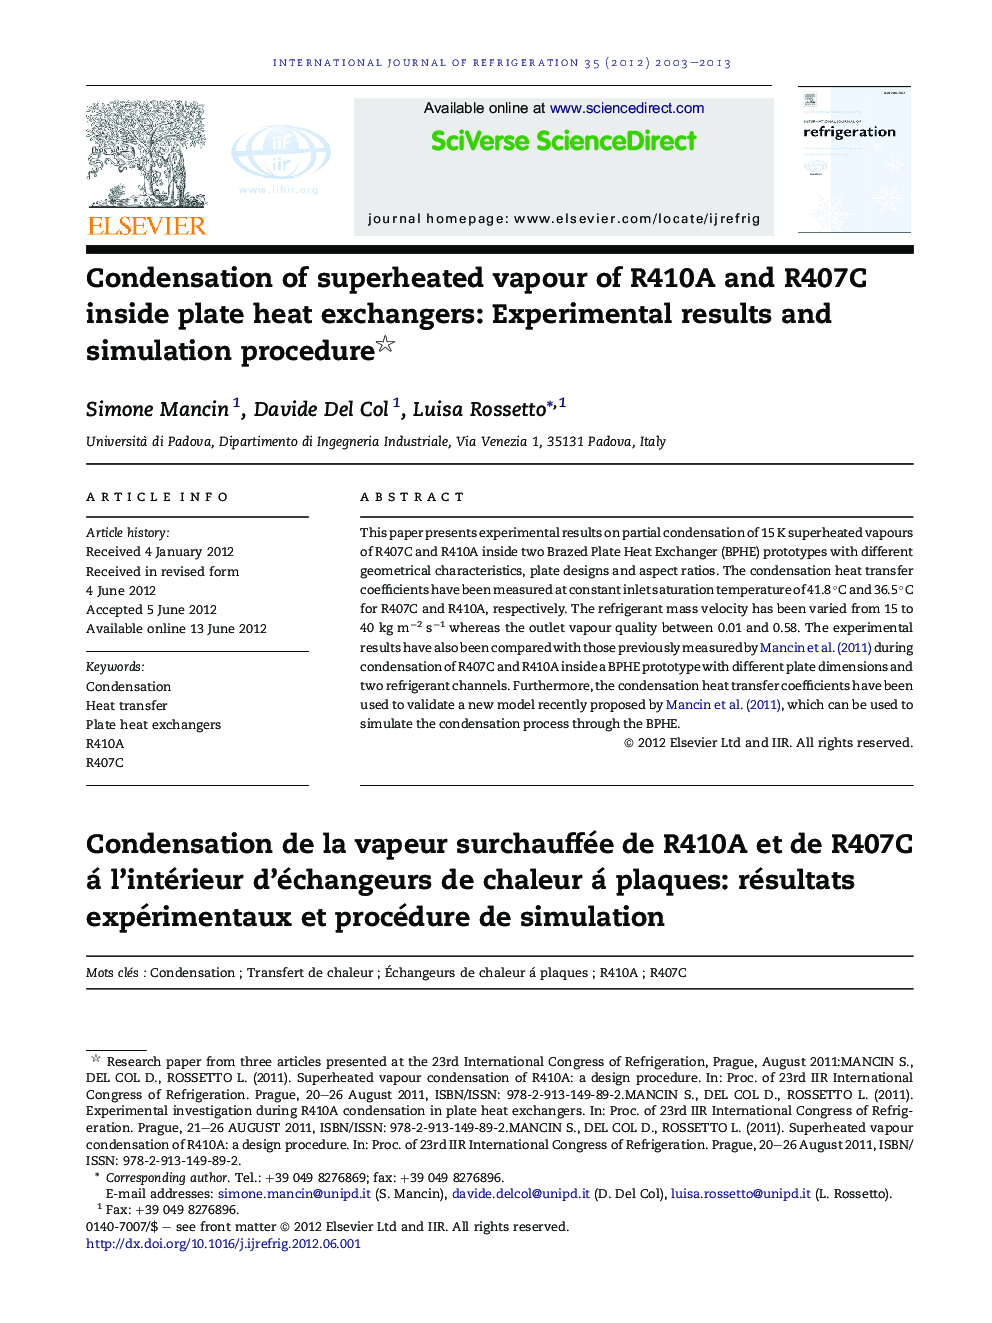 Condensation of superheated vapour of R410A and R407C inside plate heat exchangers: Experimental results and simulation procedure 